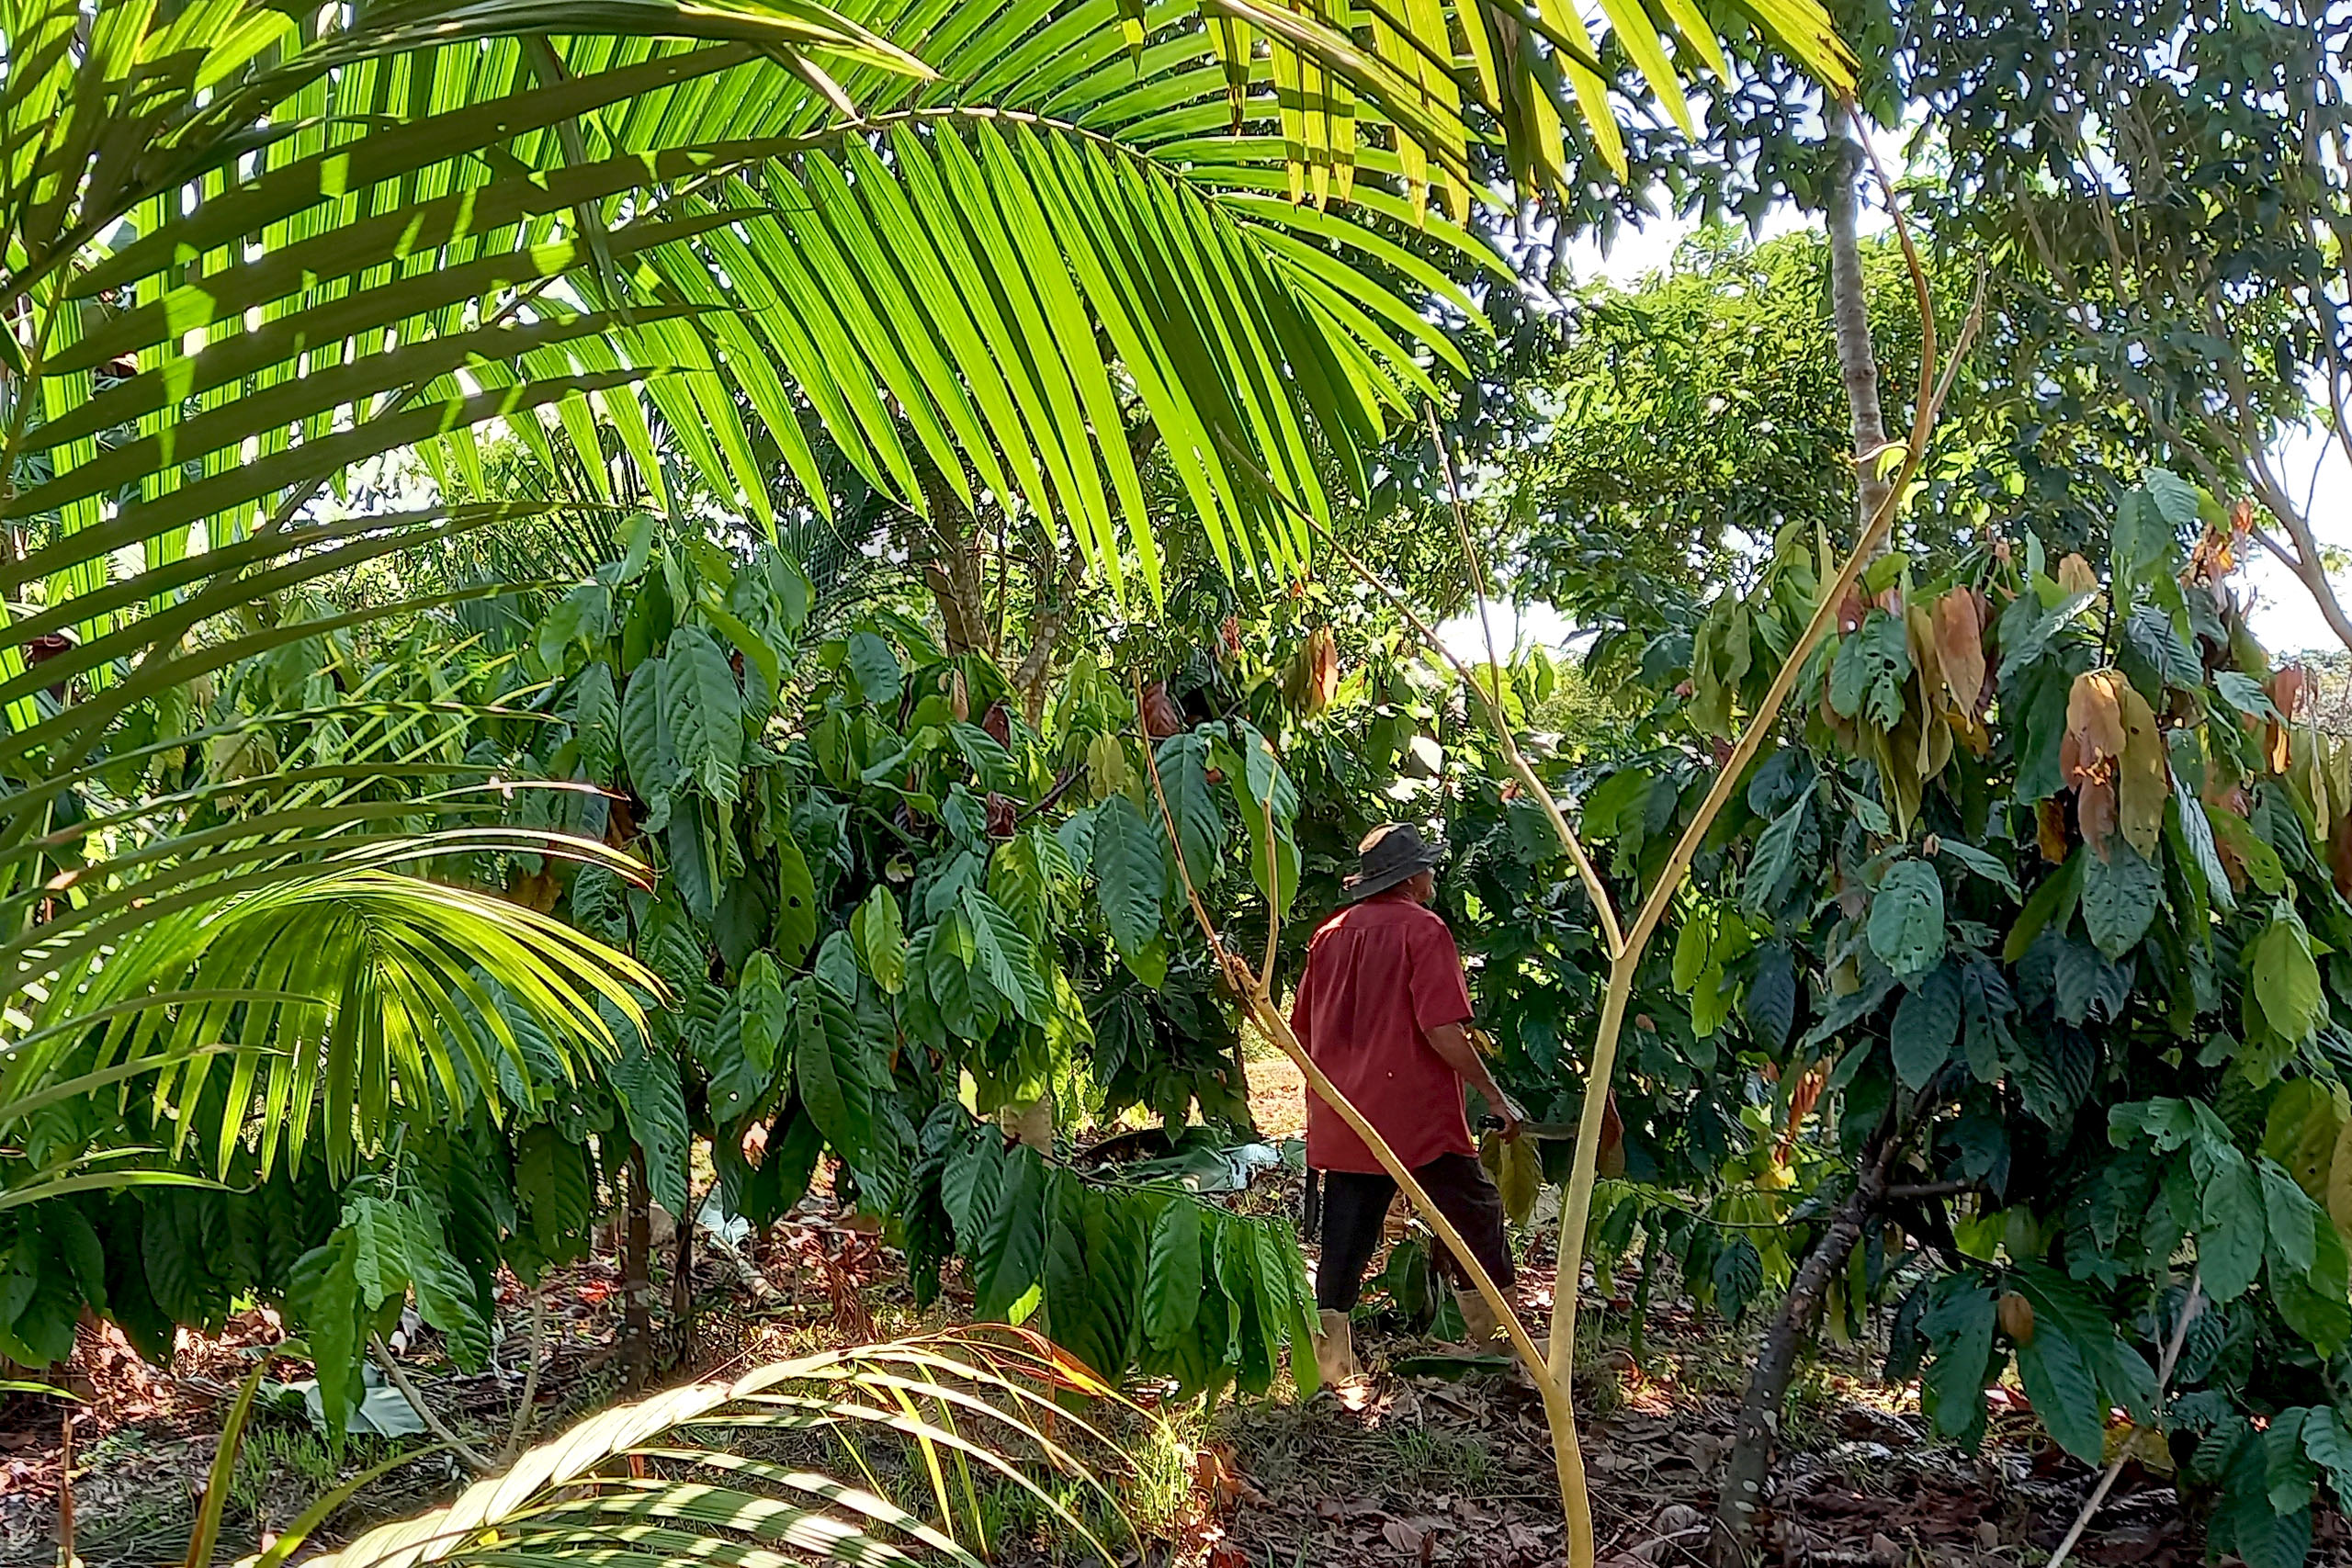 <p>A farmer walks within a regenerative agriculture project in the Brazilian Amazon. Here, oil palm is planted alongside açaí, cocoa and ingá. (Image: © Jimi Amaral/SAF Dendê via CIFOR-ICRAF Brazil)</p>“></p>



<p>A farmer walks within a regenerative agriculture project in the Brazilian Amazon. Here, oil palm is planted alongside açaí, cocoa and ingá. (Image: © Jimi Amaral/SAF Dendê via CIFOR-ICRAF Brazil)<a href=